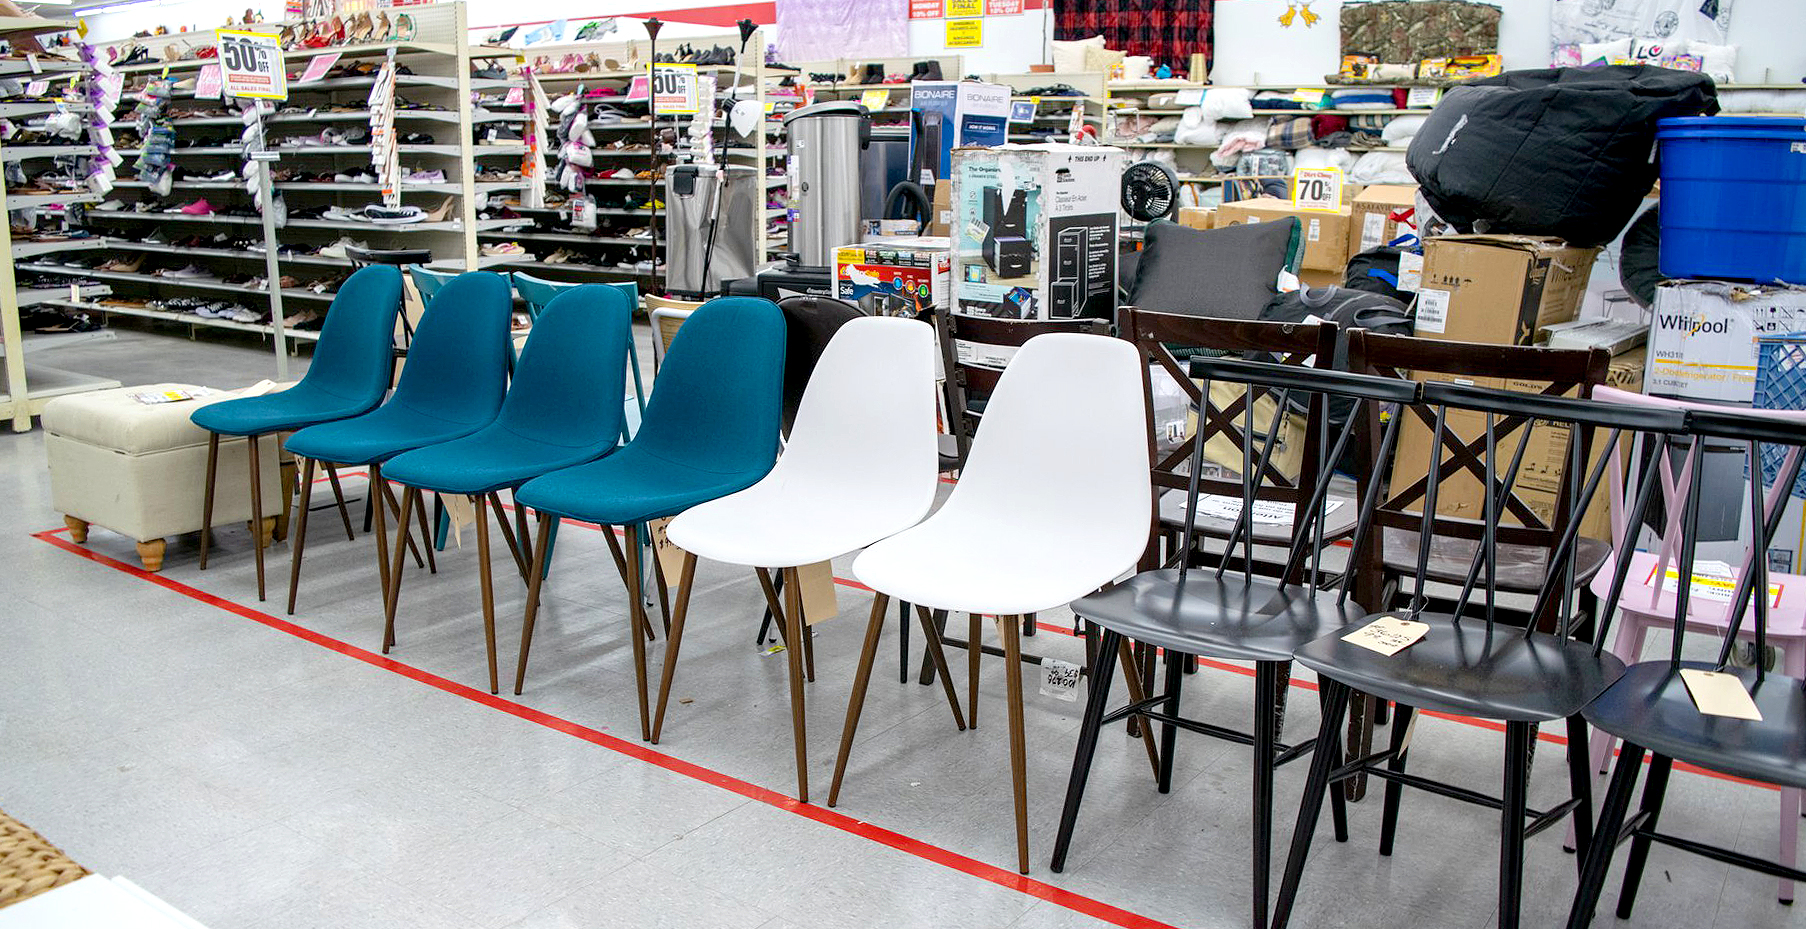 https://prod-cdn.thekrazycouponlady.com/wp-content/uploads/2021/10/find-target-salvage-store-chairs-feature-1674063575-1674063575.jpg